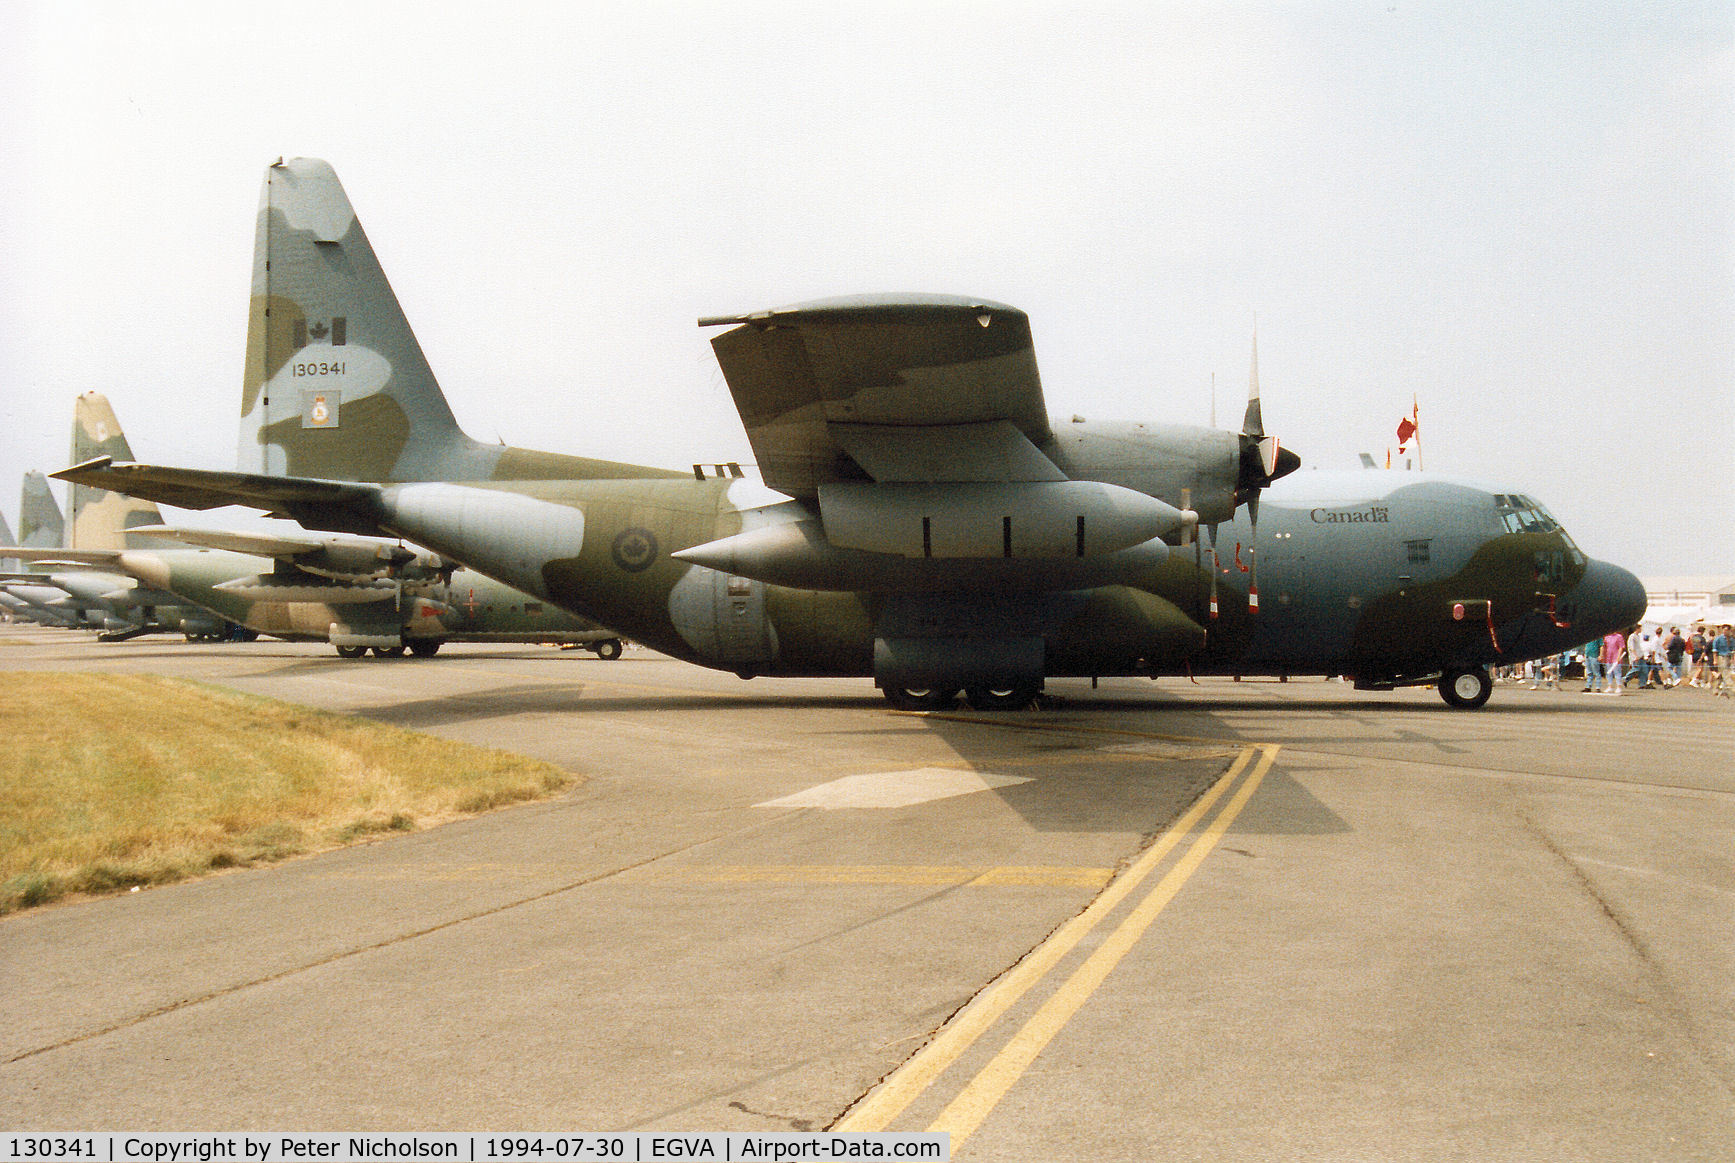 130341, 1989 Lockheed KCC-130H Hercules C/N 382-5200, KCC-130H Hercules, callsign Canforce 6885, of 435 Squadron Canadian Armed Forces basd at Edmonton on display at the 1994 Intnl Air Tattoo at RAF Fairford.